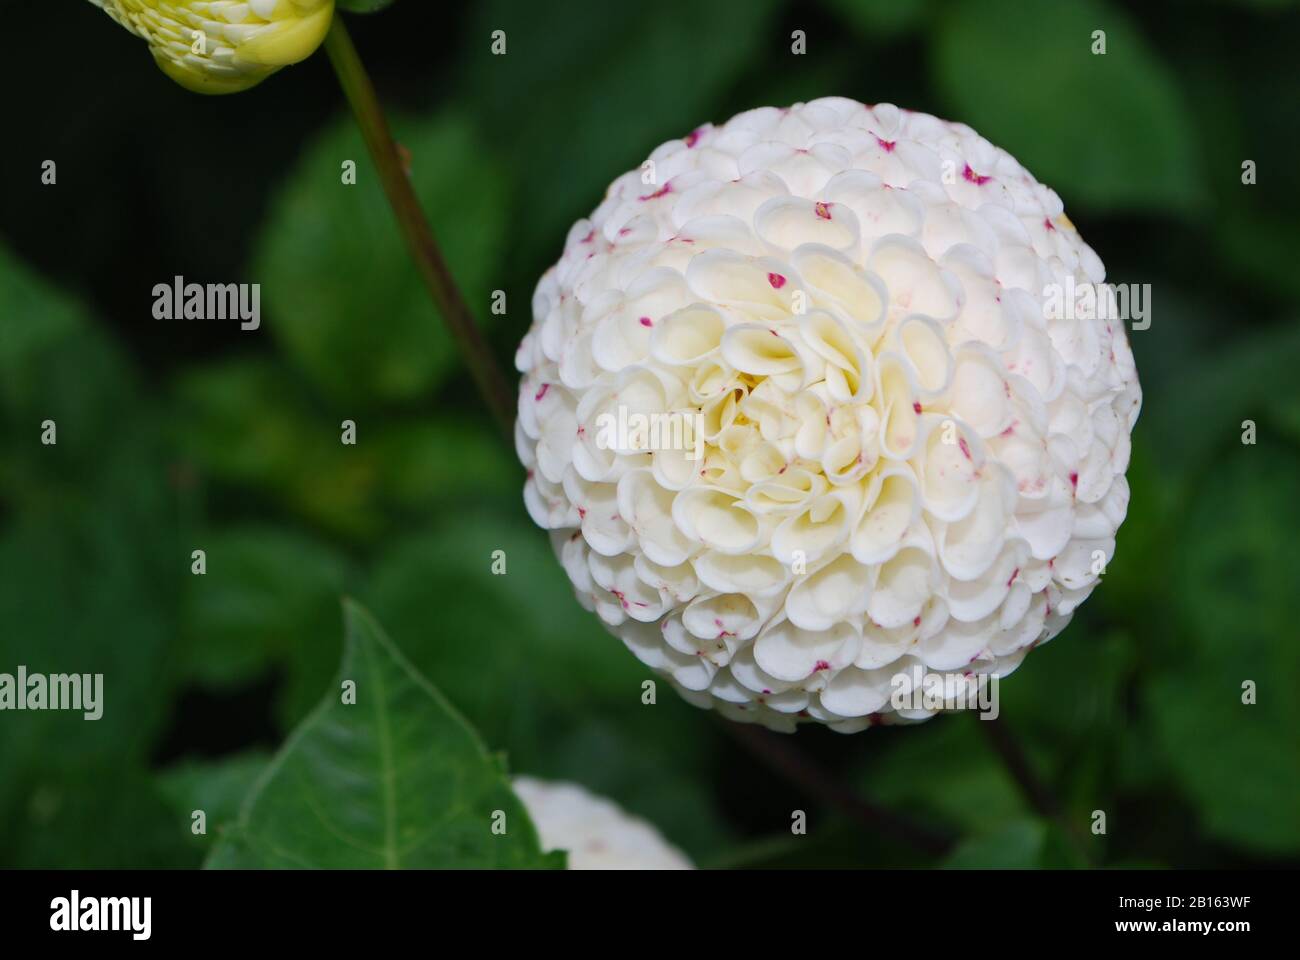 White and Pink Dahlia Flower Stock Photo